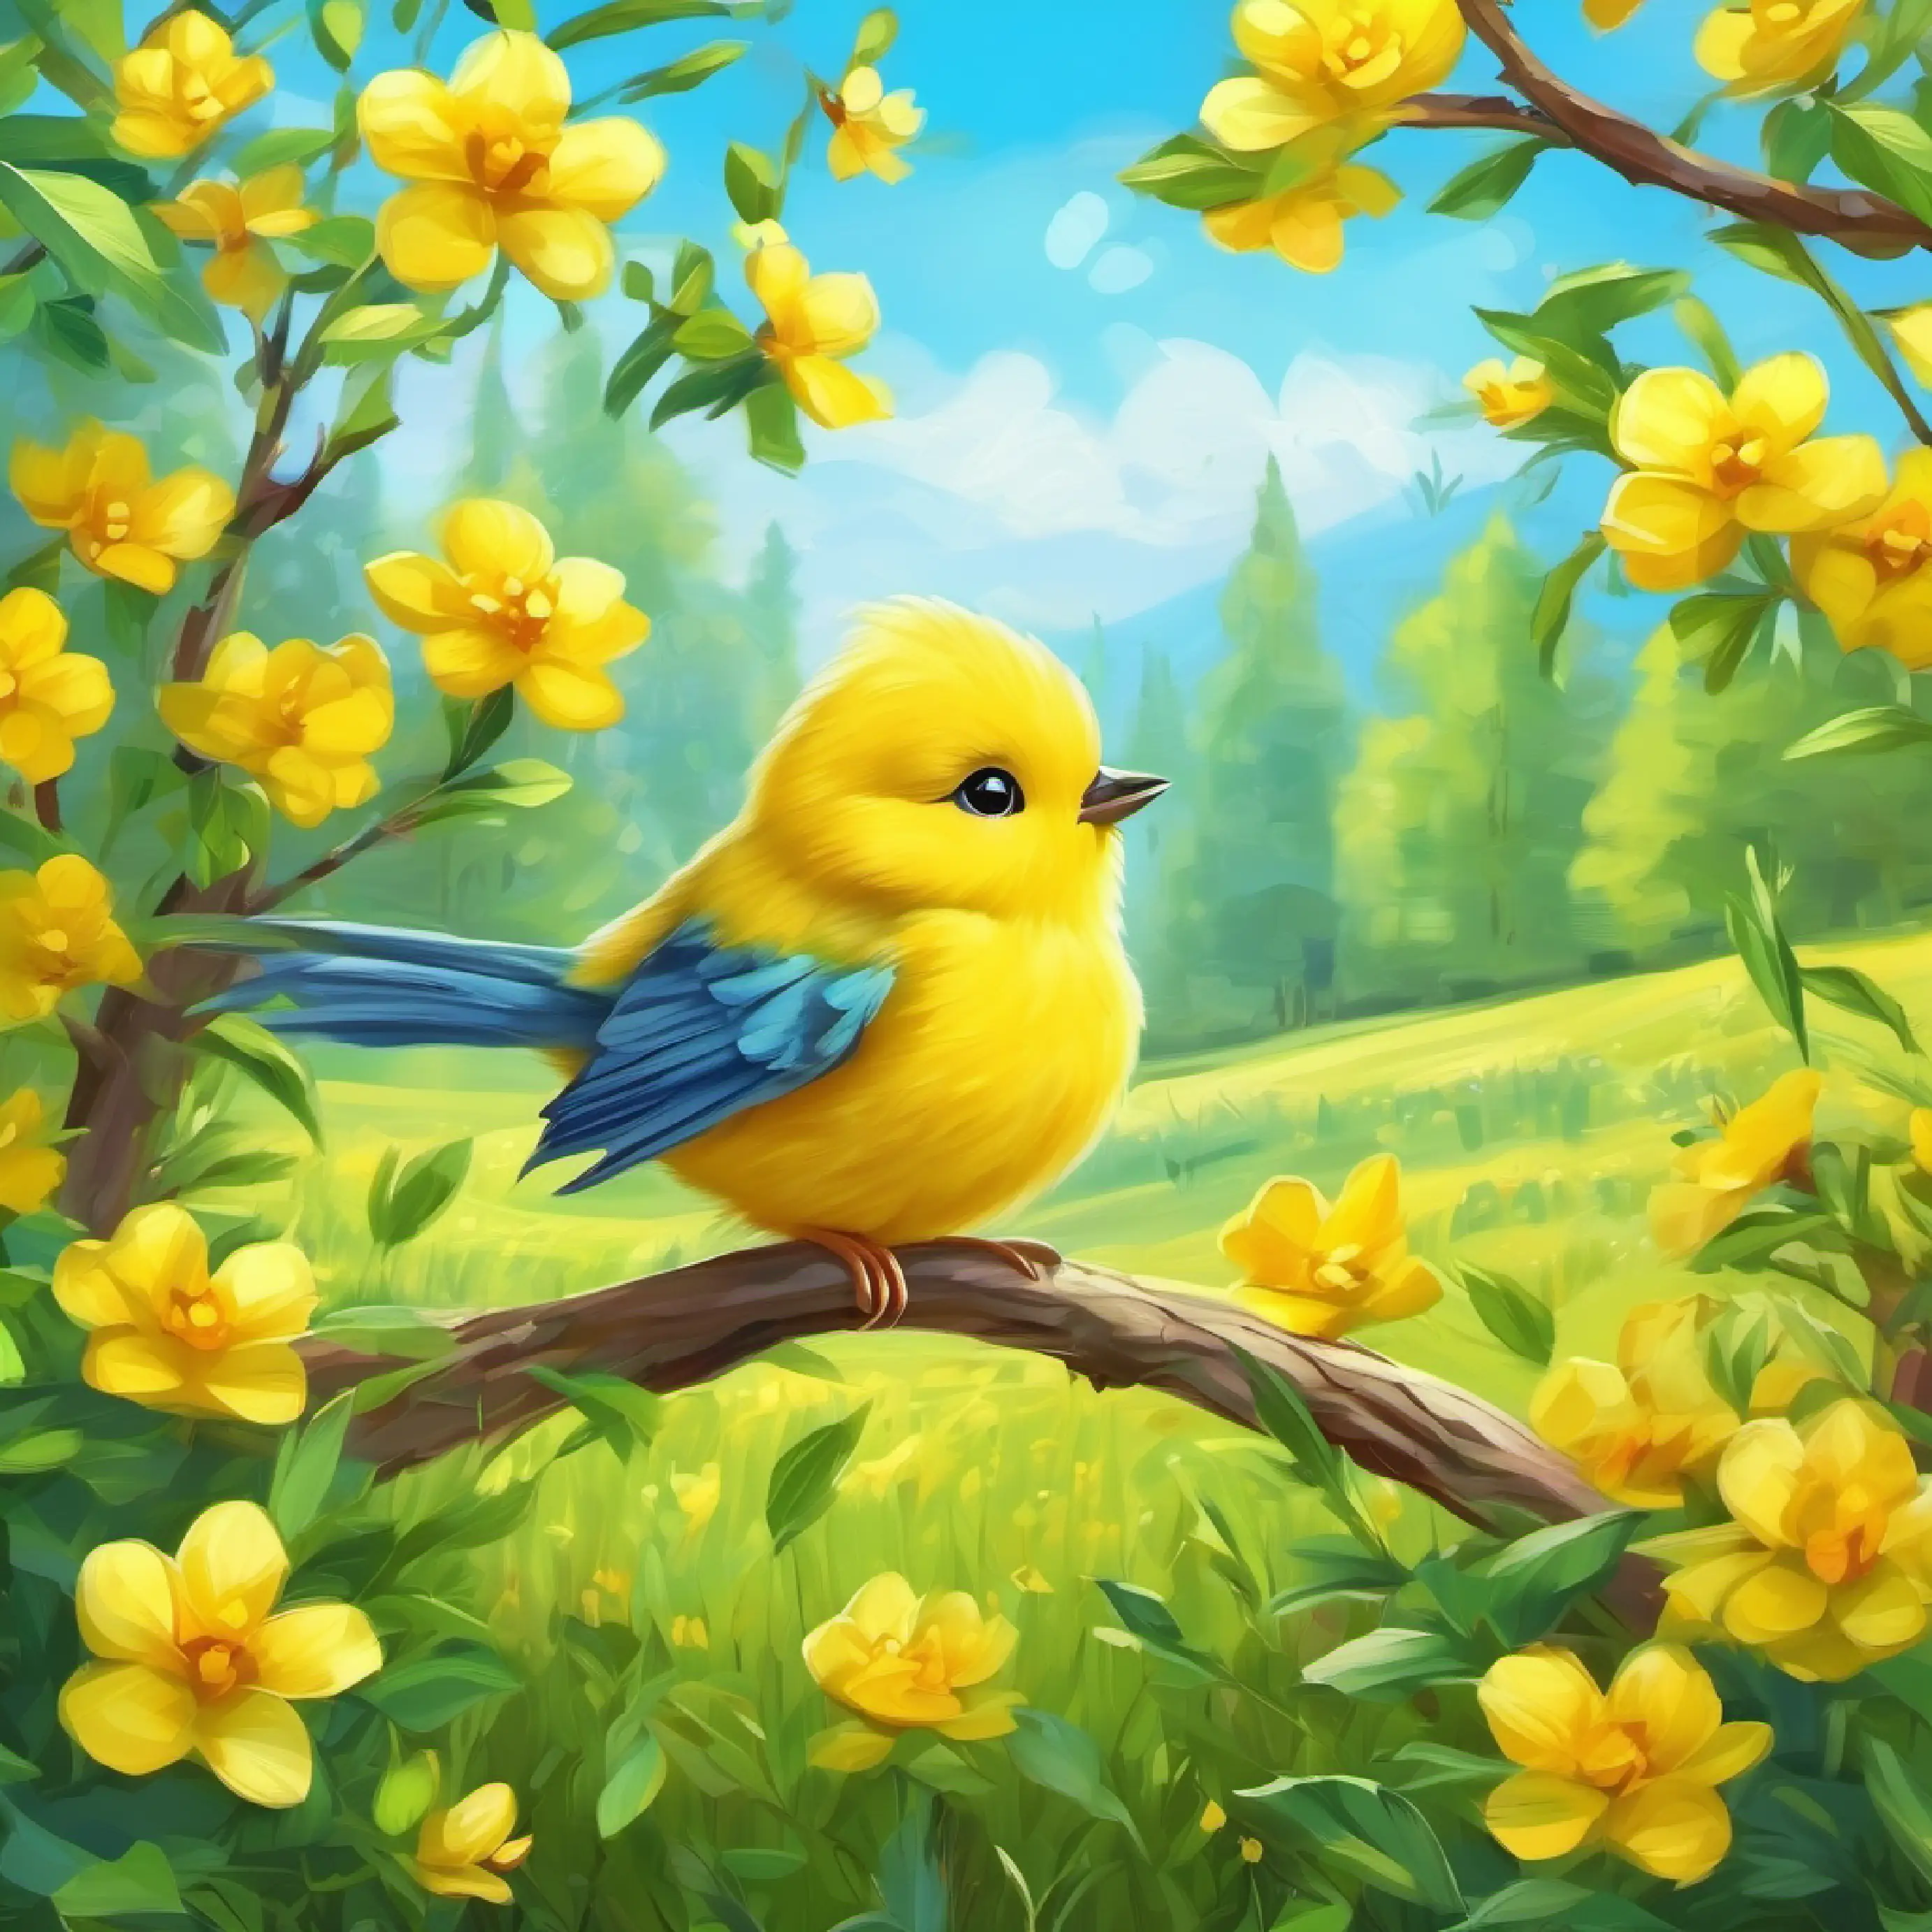 Tweetie yellow bird in the meadow on a tree in spring